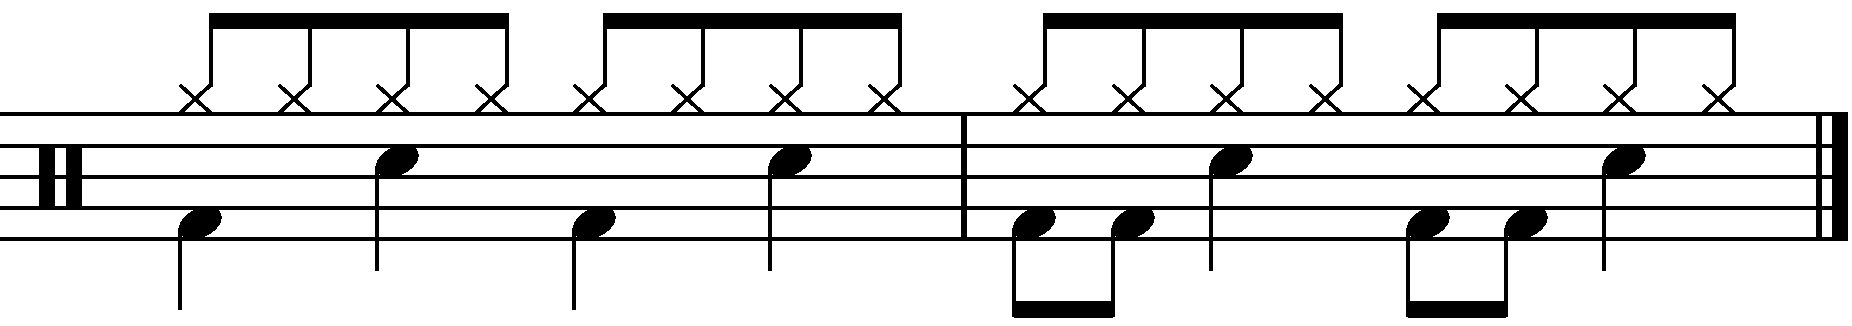 2 Bar Grooves - Example 2a